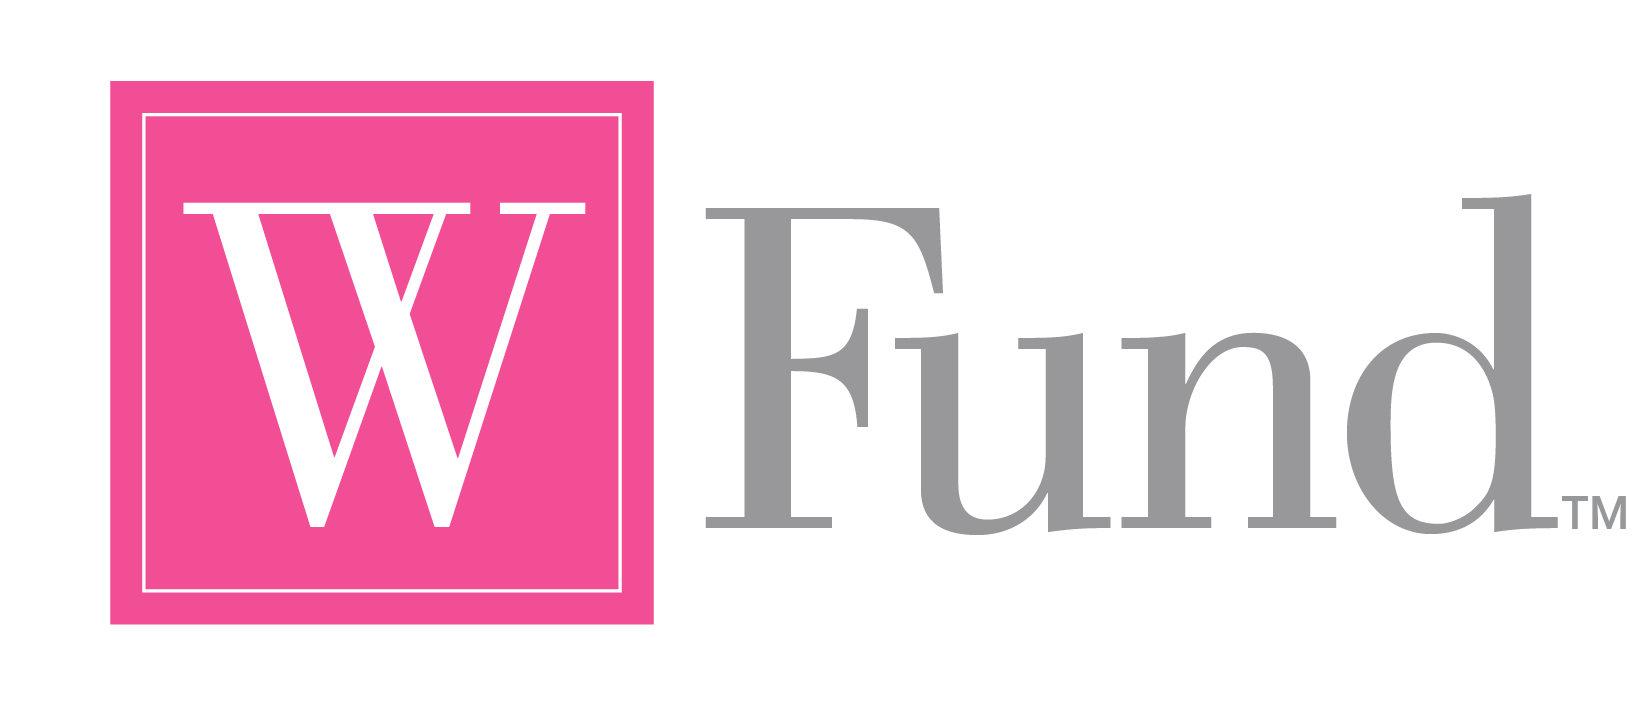 A Fund for Women